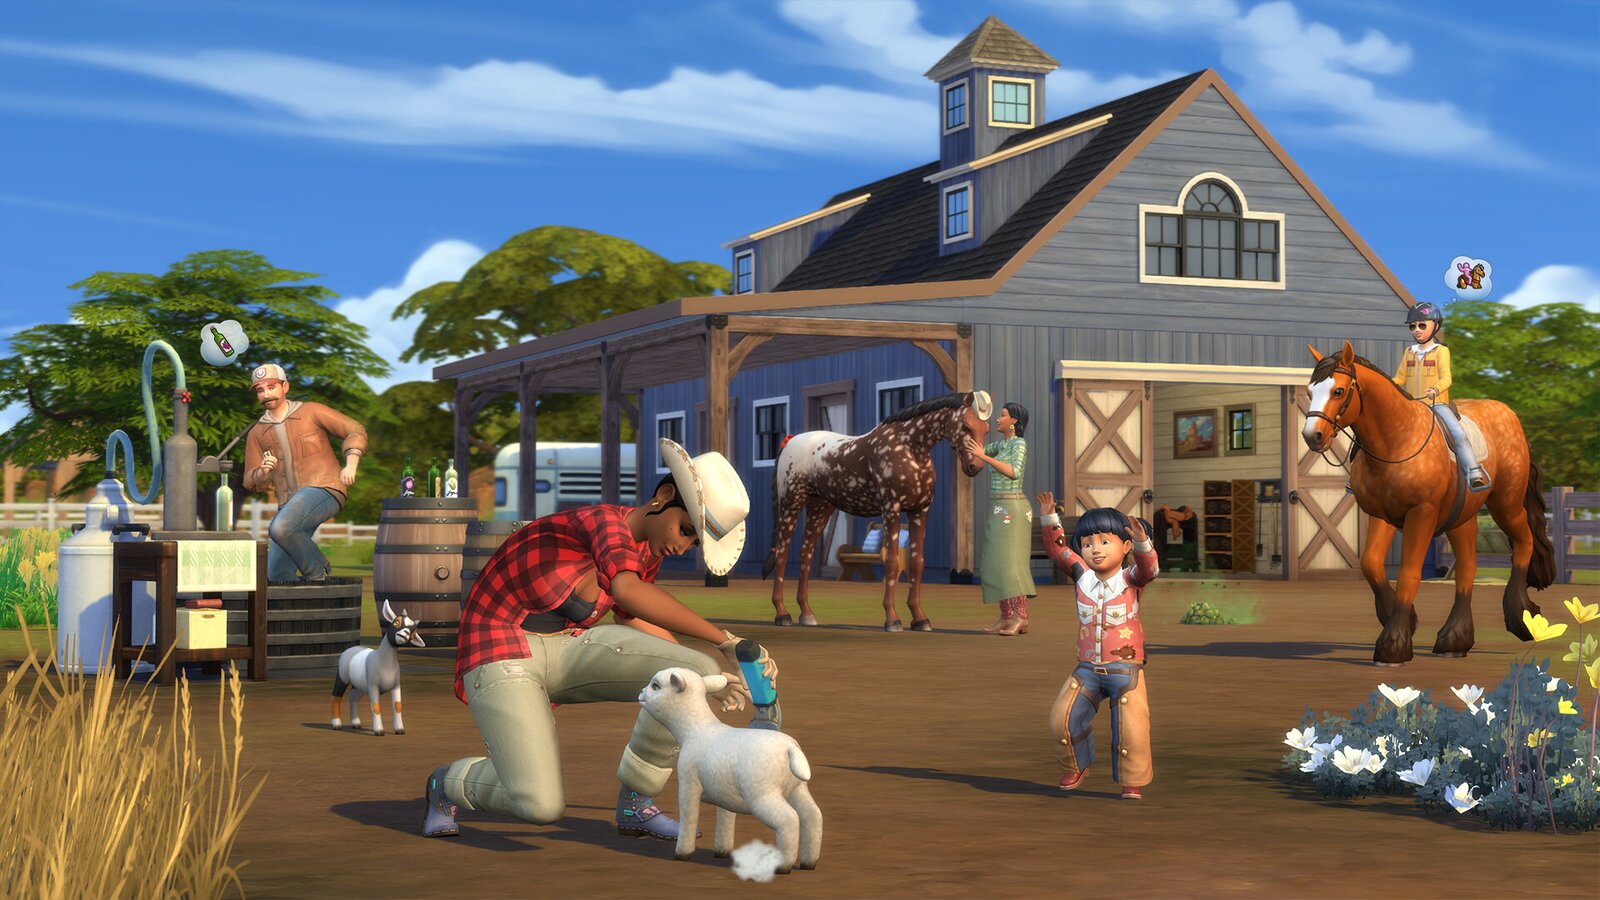 The Sims 4 - Horse Ranch